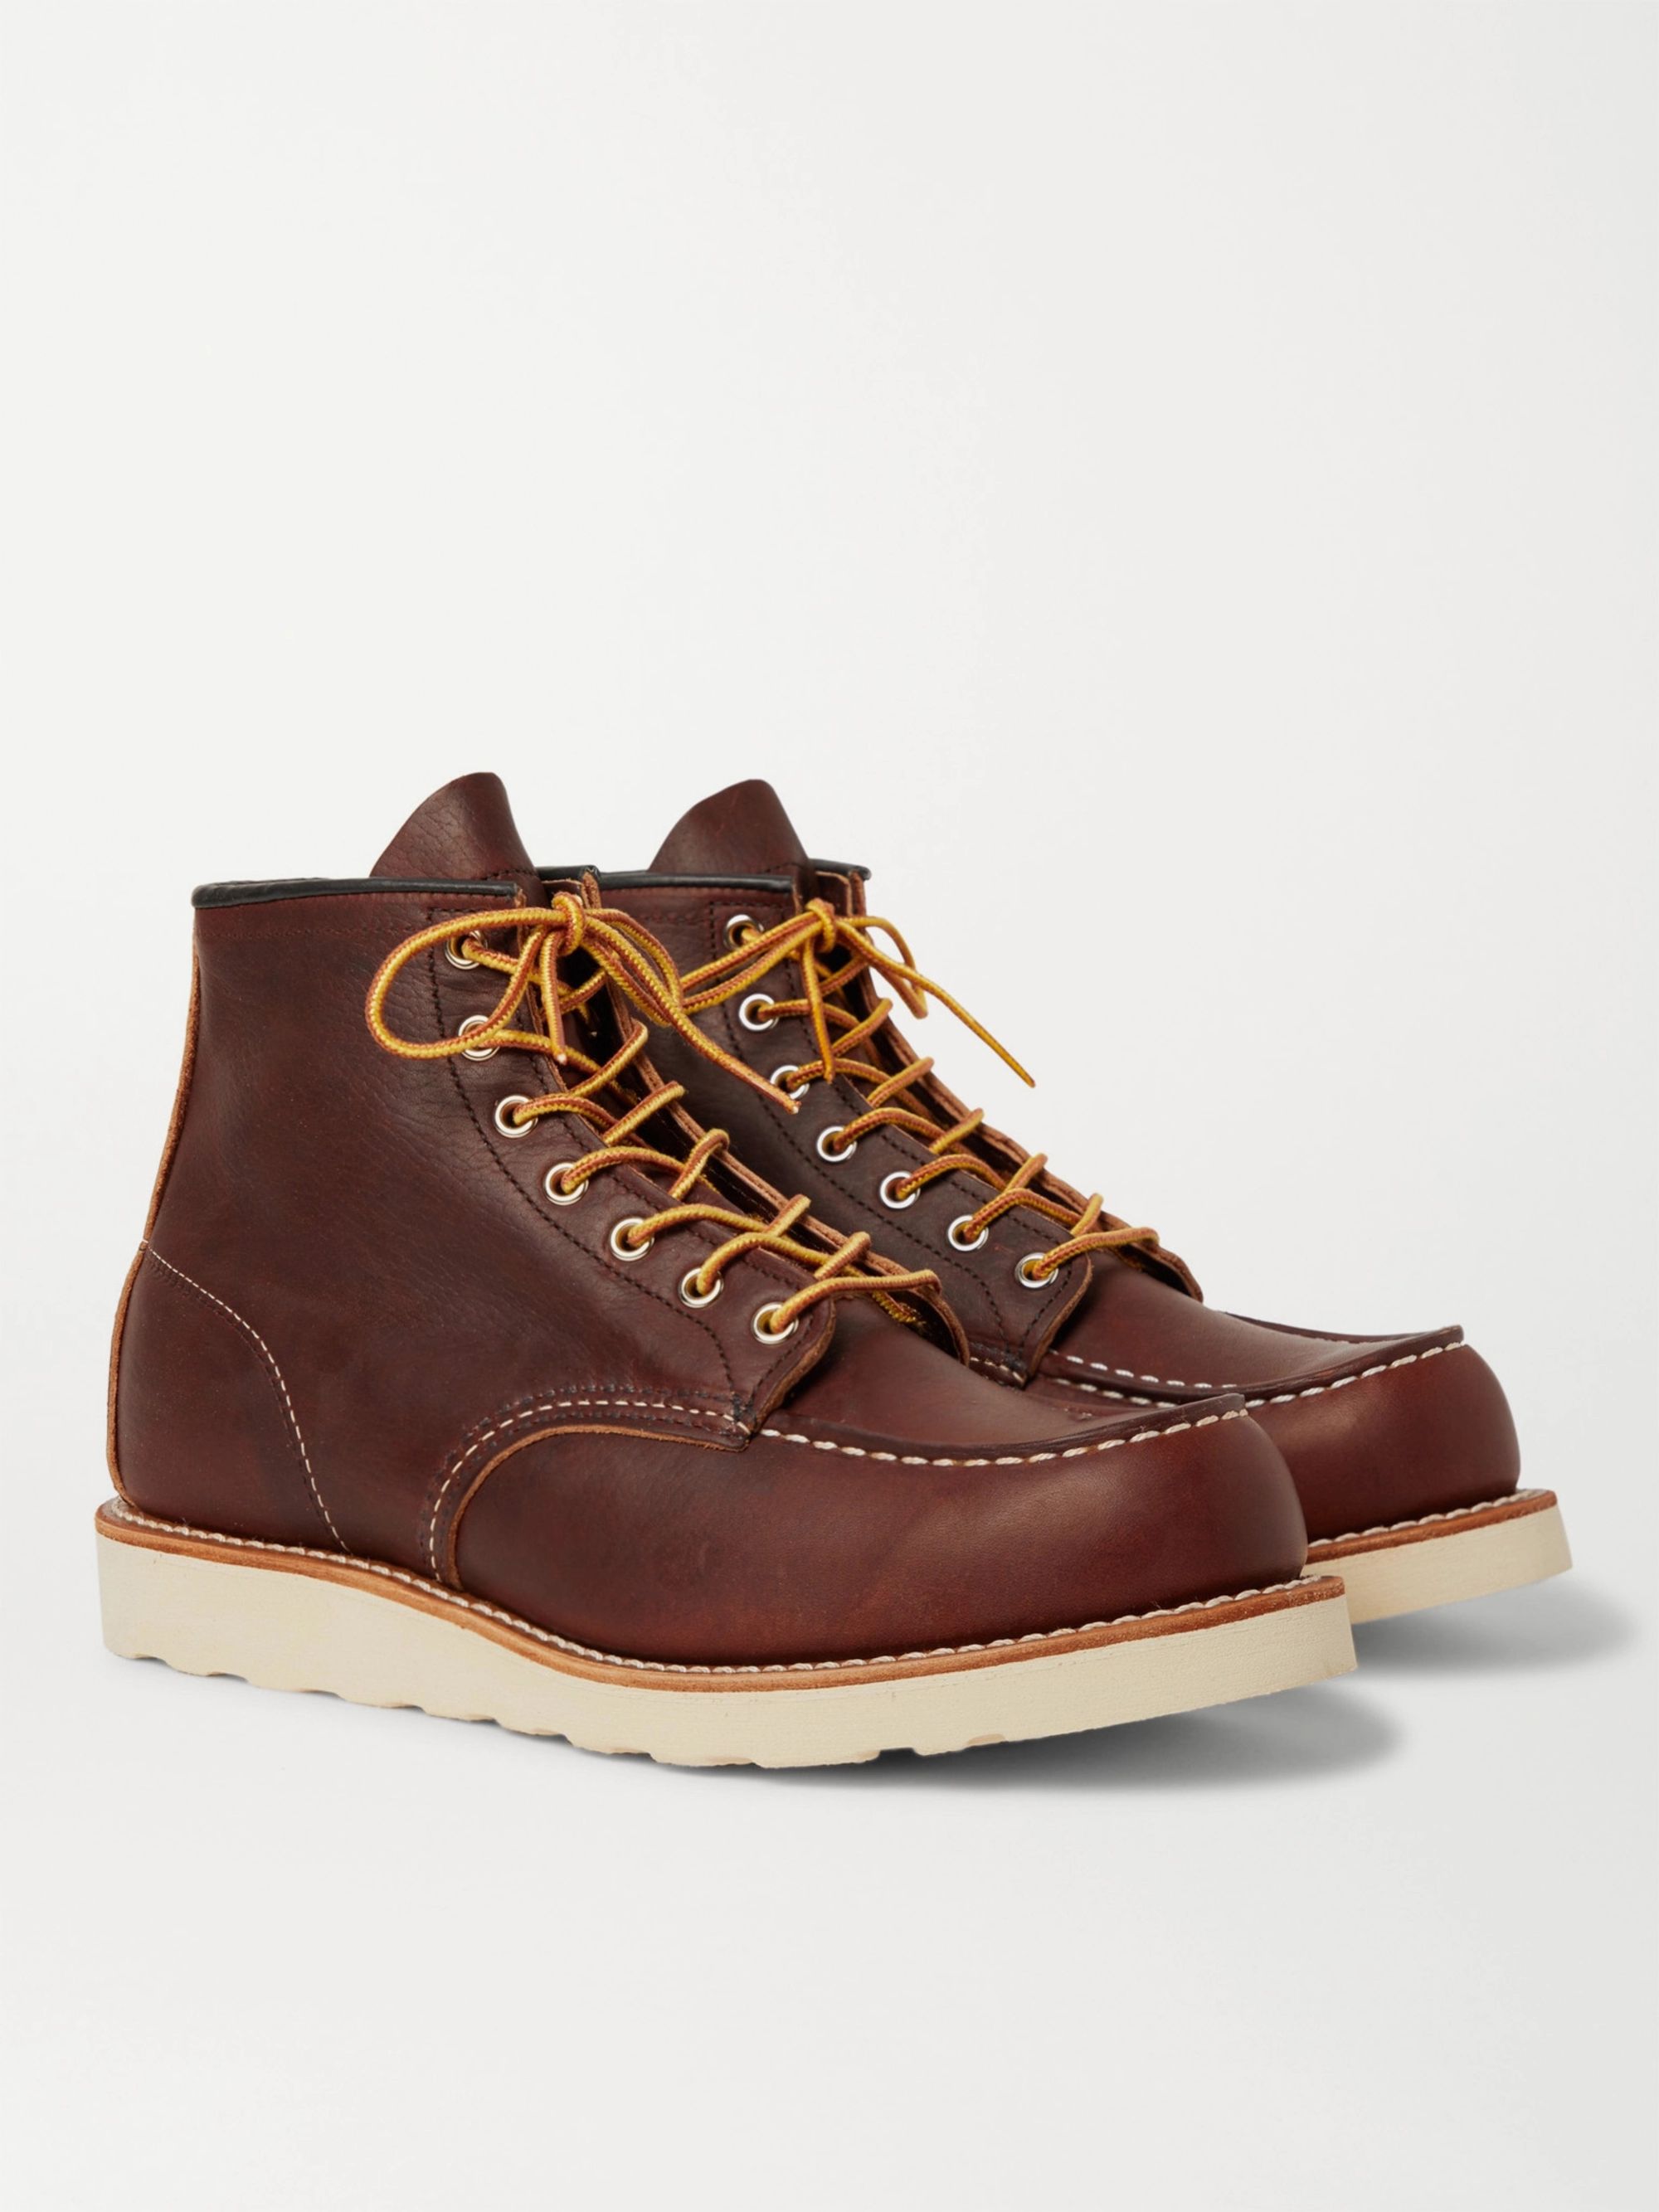 shoes that look like blundstones